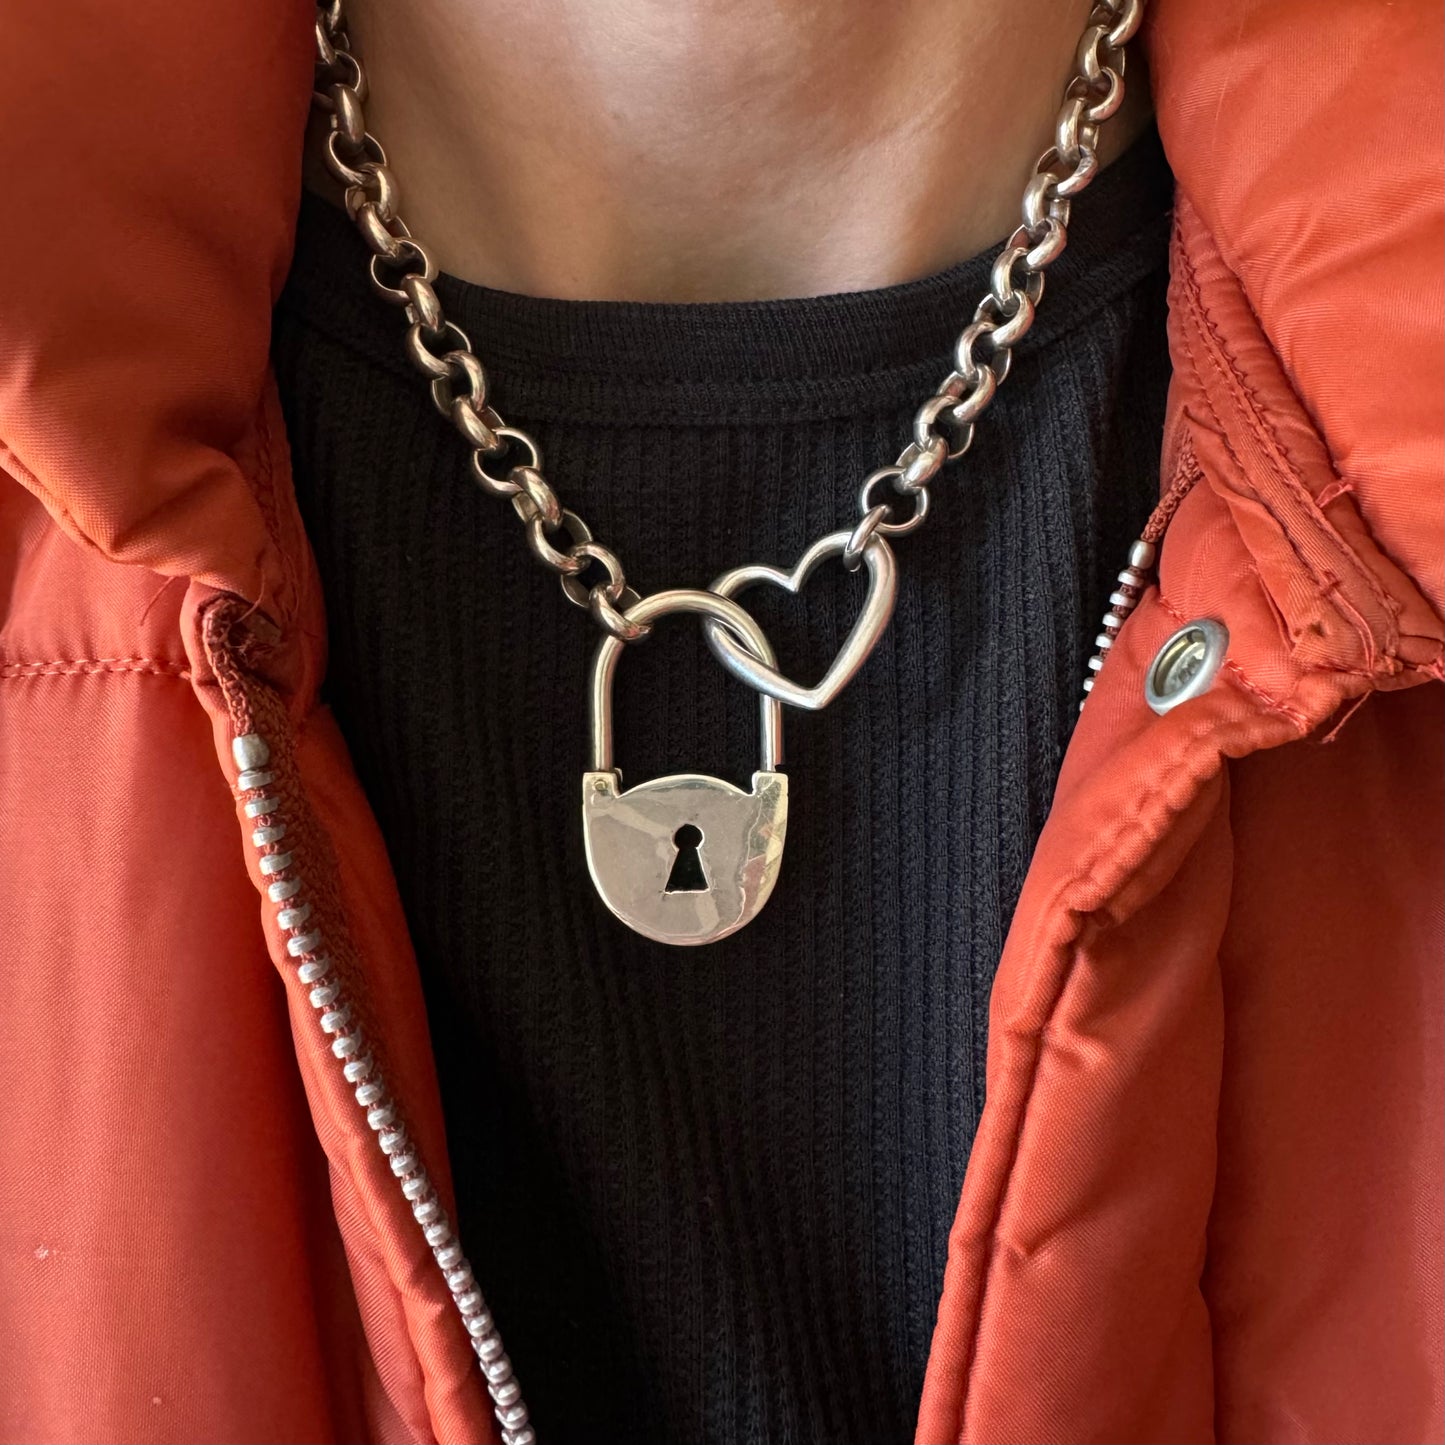 reimagined V I N T A G E // lock without a key / sterling silver chunky rolo chain with padlock clasp / 15.5" to 15.75" over 79g